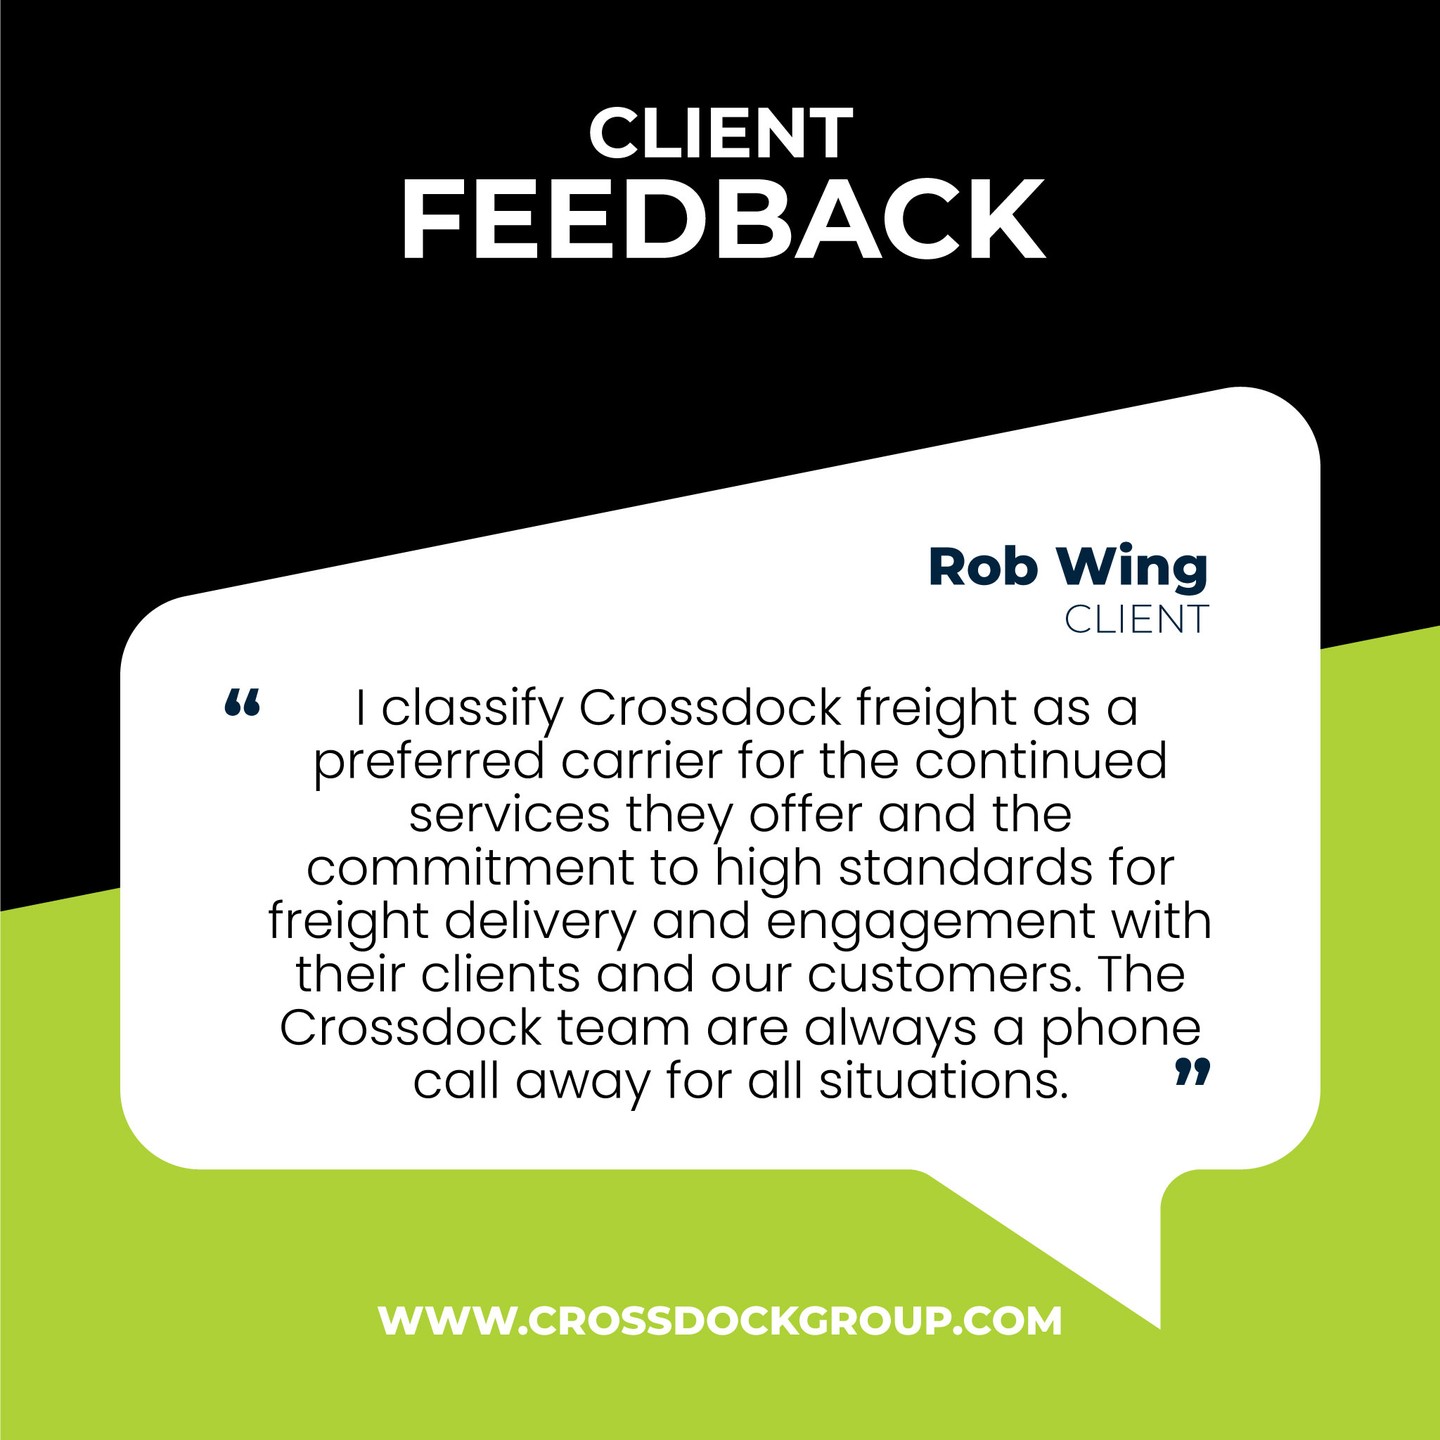 Make us your preferred carrier and experience the Crossdock difference.

Call the pros at 888-535-3999.

#HappyCustomer
#CustomerTestimonial
#LoveOurCustomers
#FeedbackFriday
#ClientLove
#TestimonialTuesday
#CustomerExperience
#SatisfiedCustomer
#FiveStarReview
#CustomerAppreciation